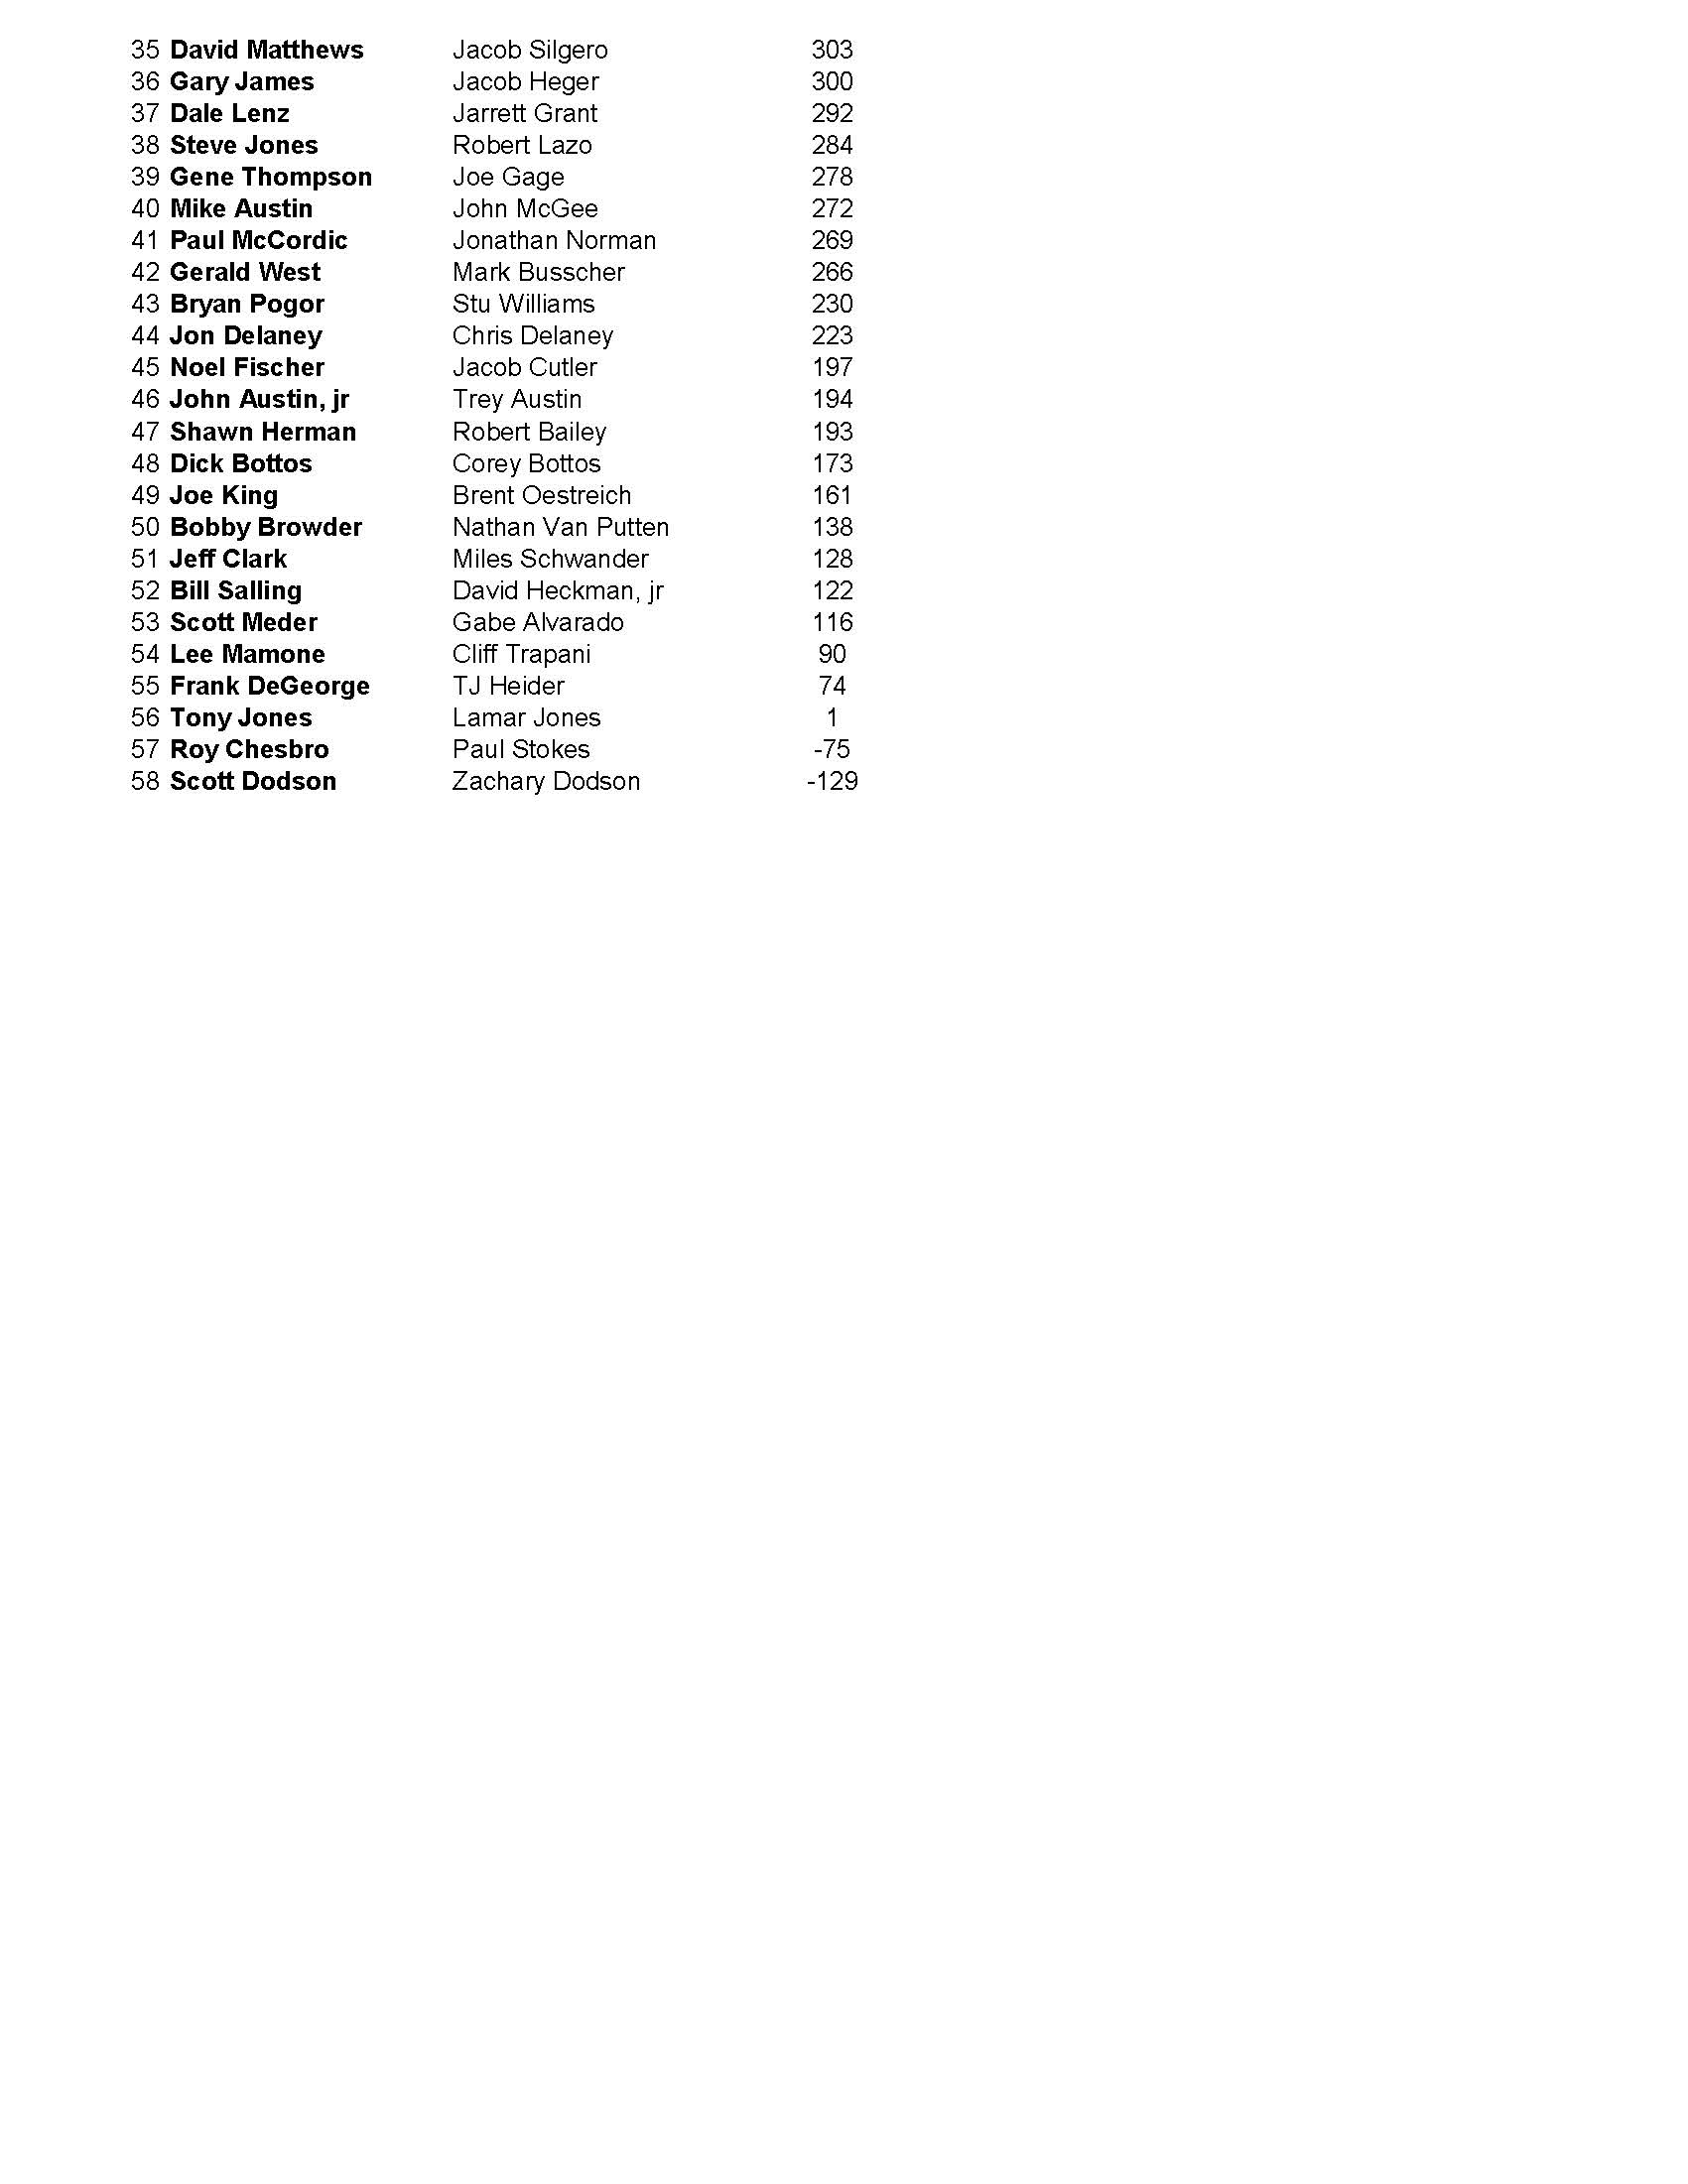 10302022results_Page_2